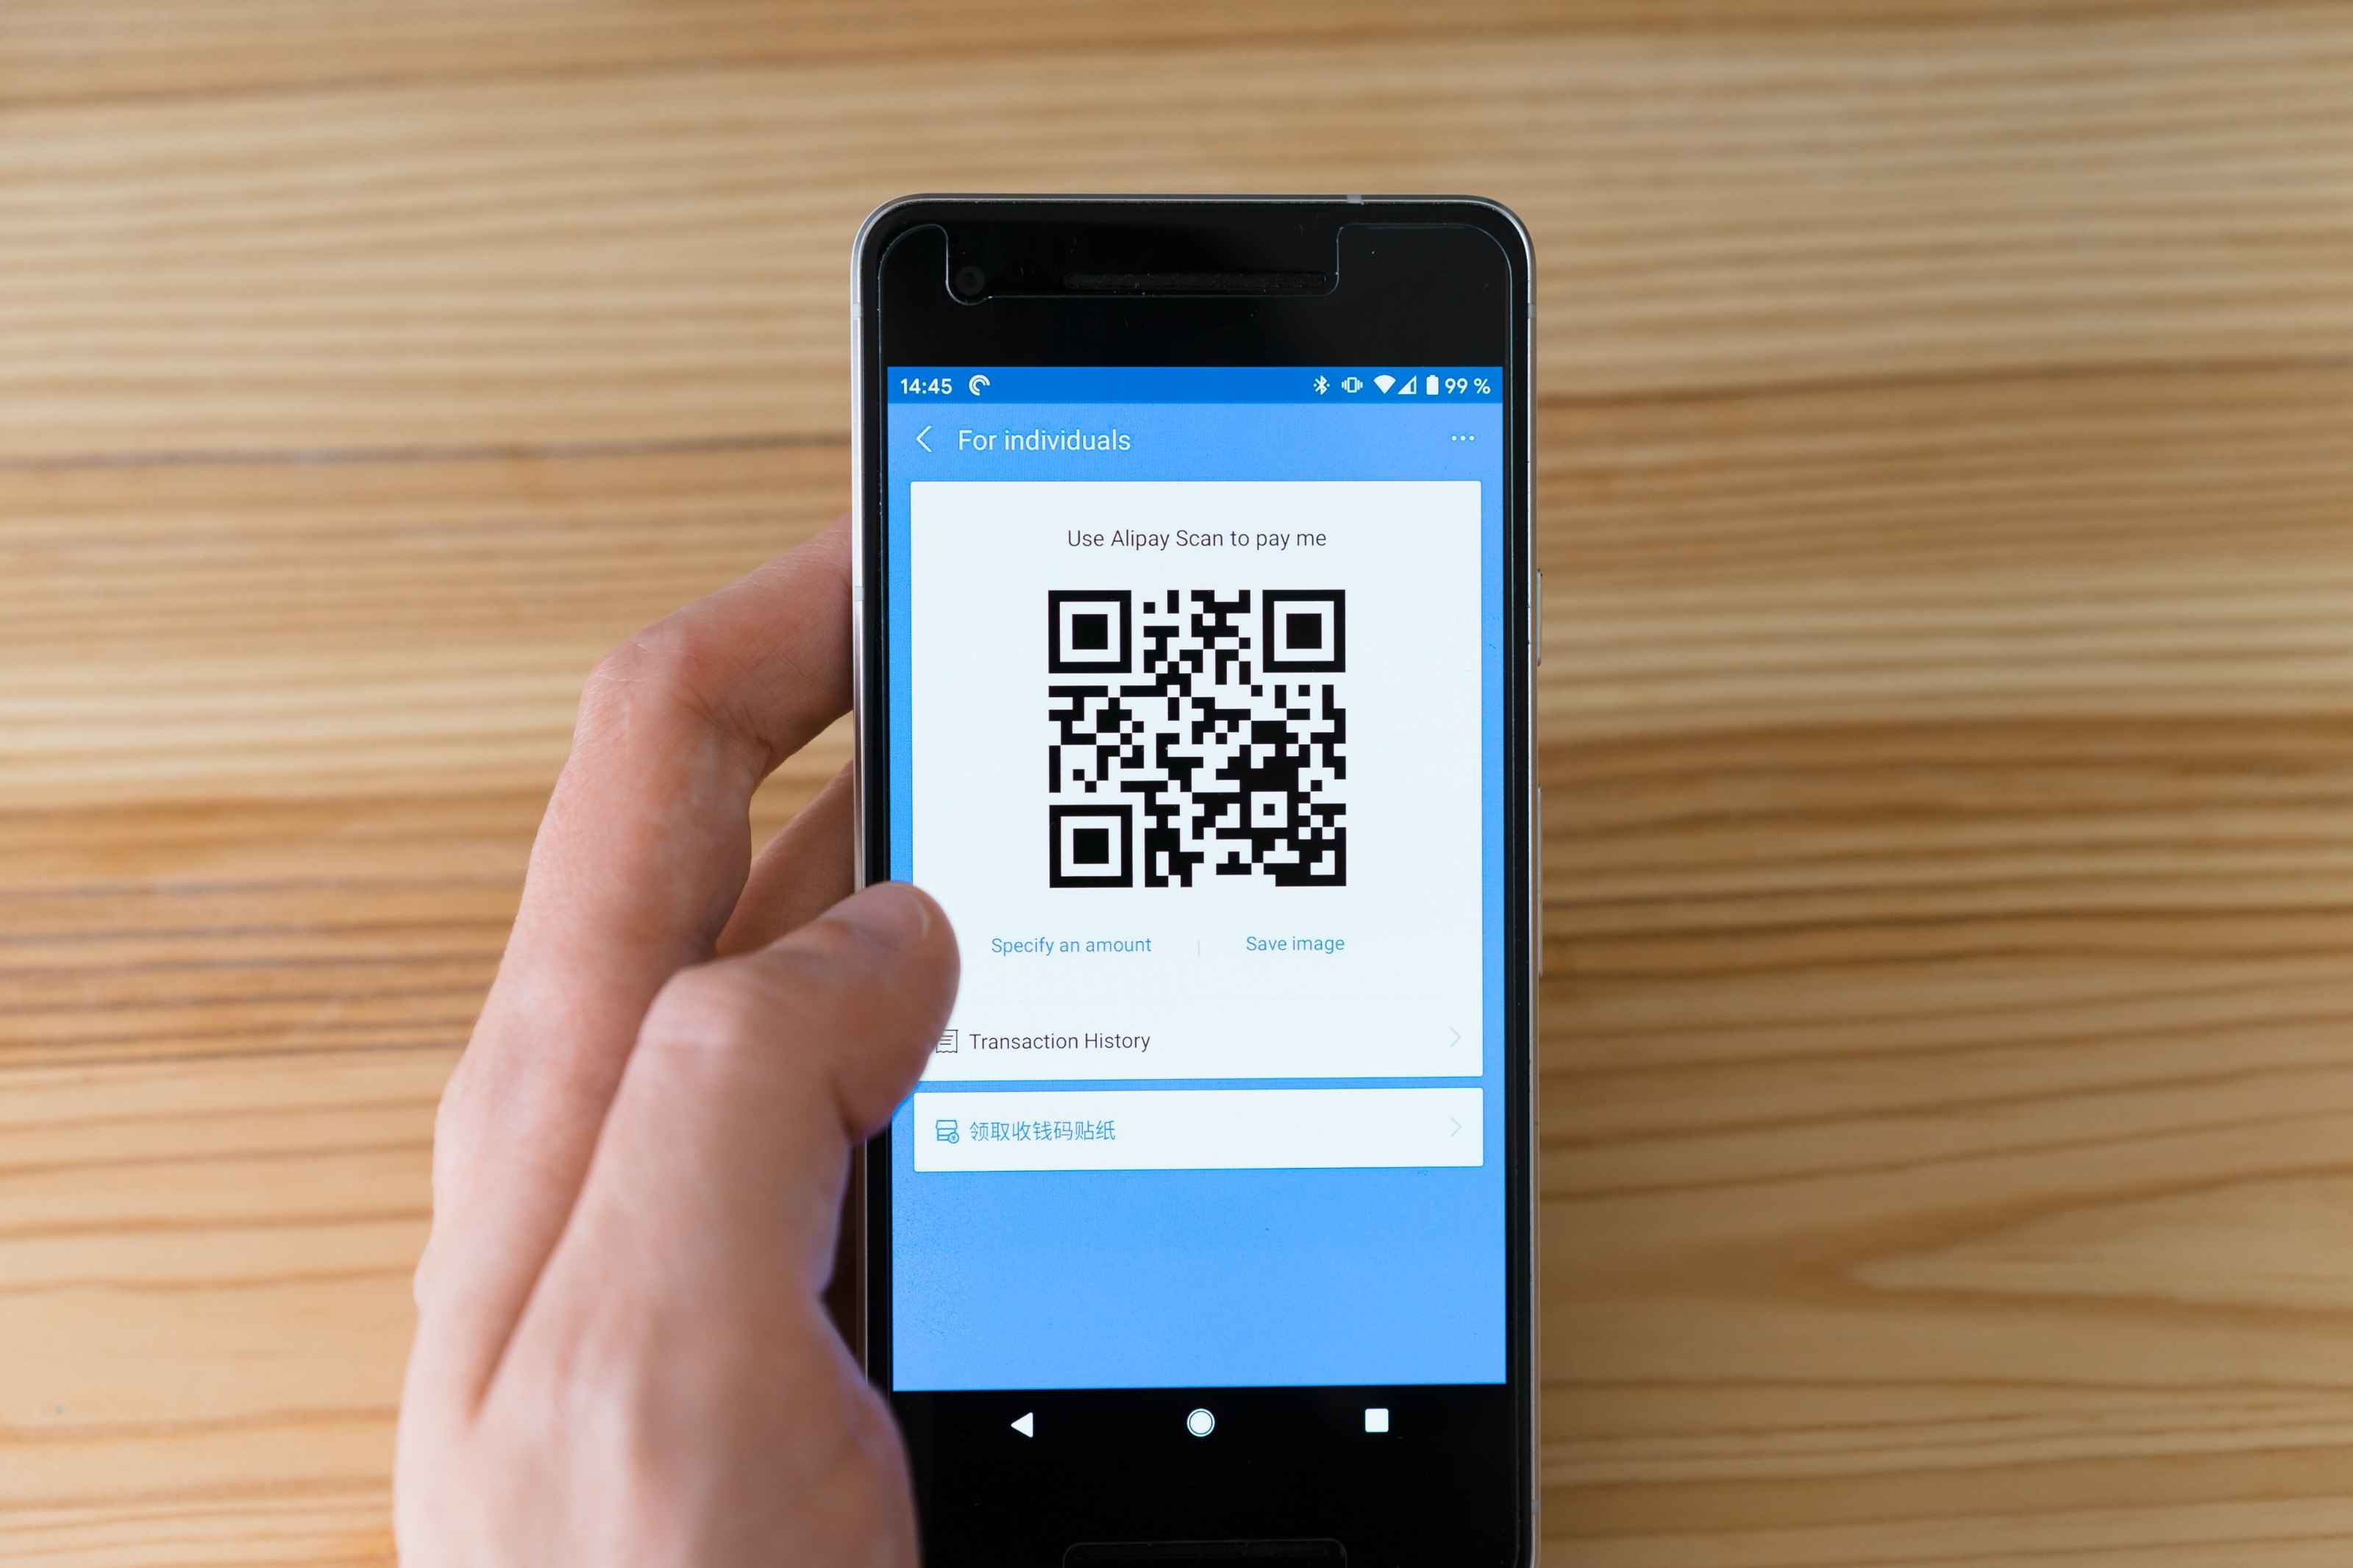 Unlock The Secret To Scanning QR Codes On Your Phone - No Second Device Needed!